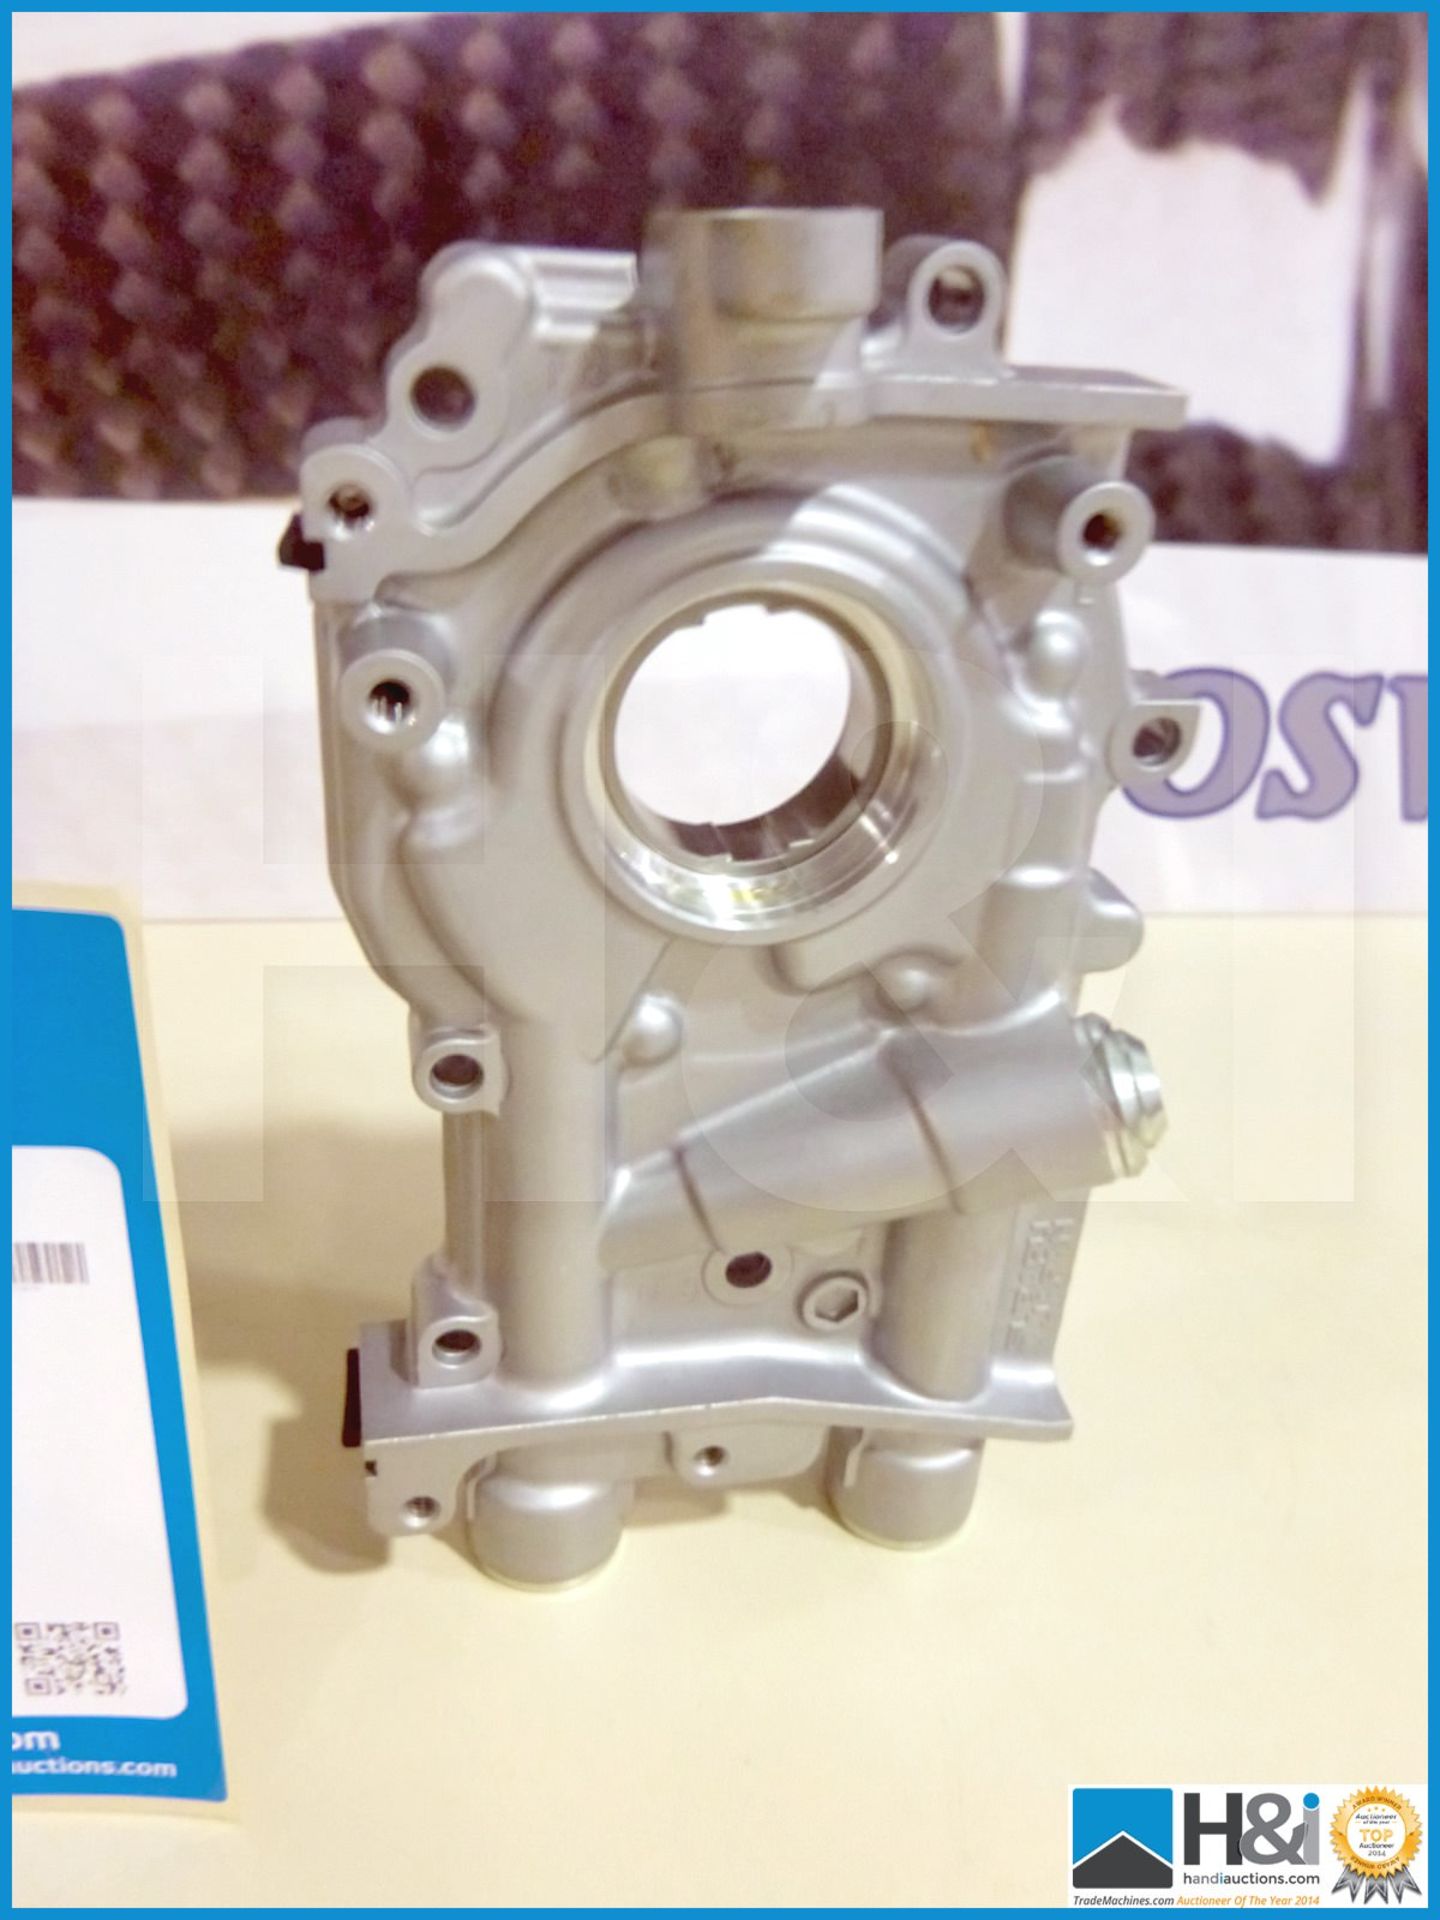 16 off Subaru EJ25 oil pump assembly 2008. Appx lot value over GBP 2,000-- MC:20004043 CILN:59 - Image 2 of 3